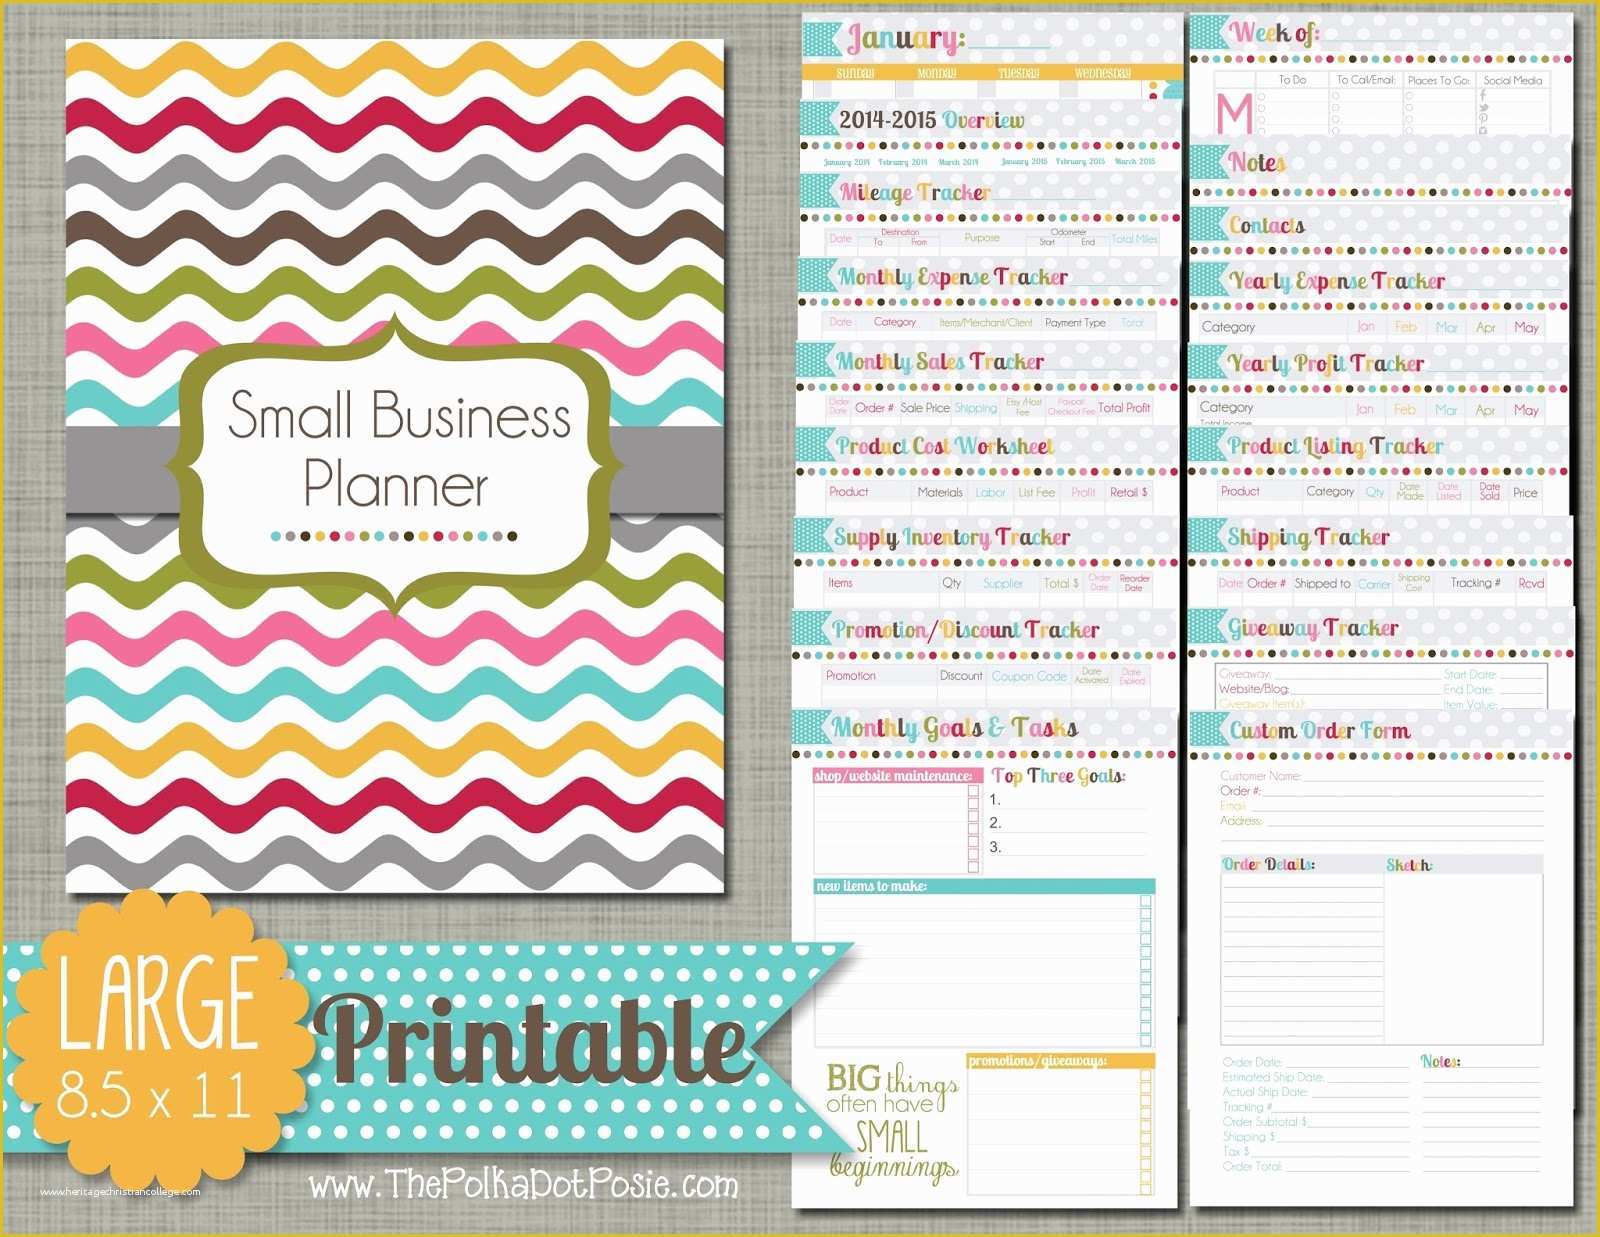 Direct Sales Business Plan Template Free Of the Polka Dot Posie Introducing Our Etsy & Small Business